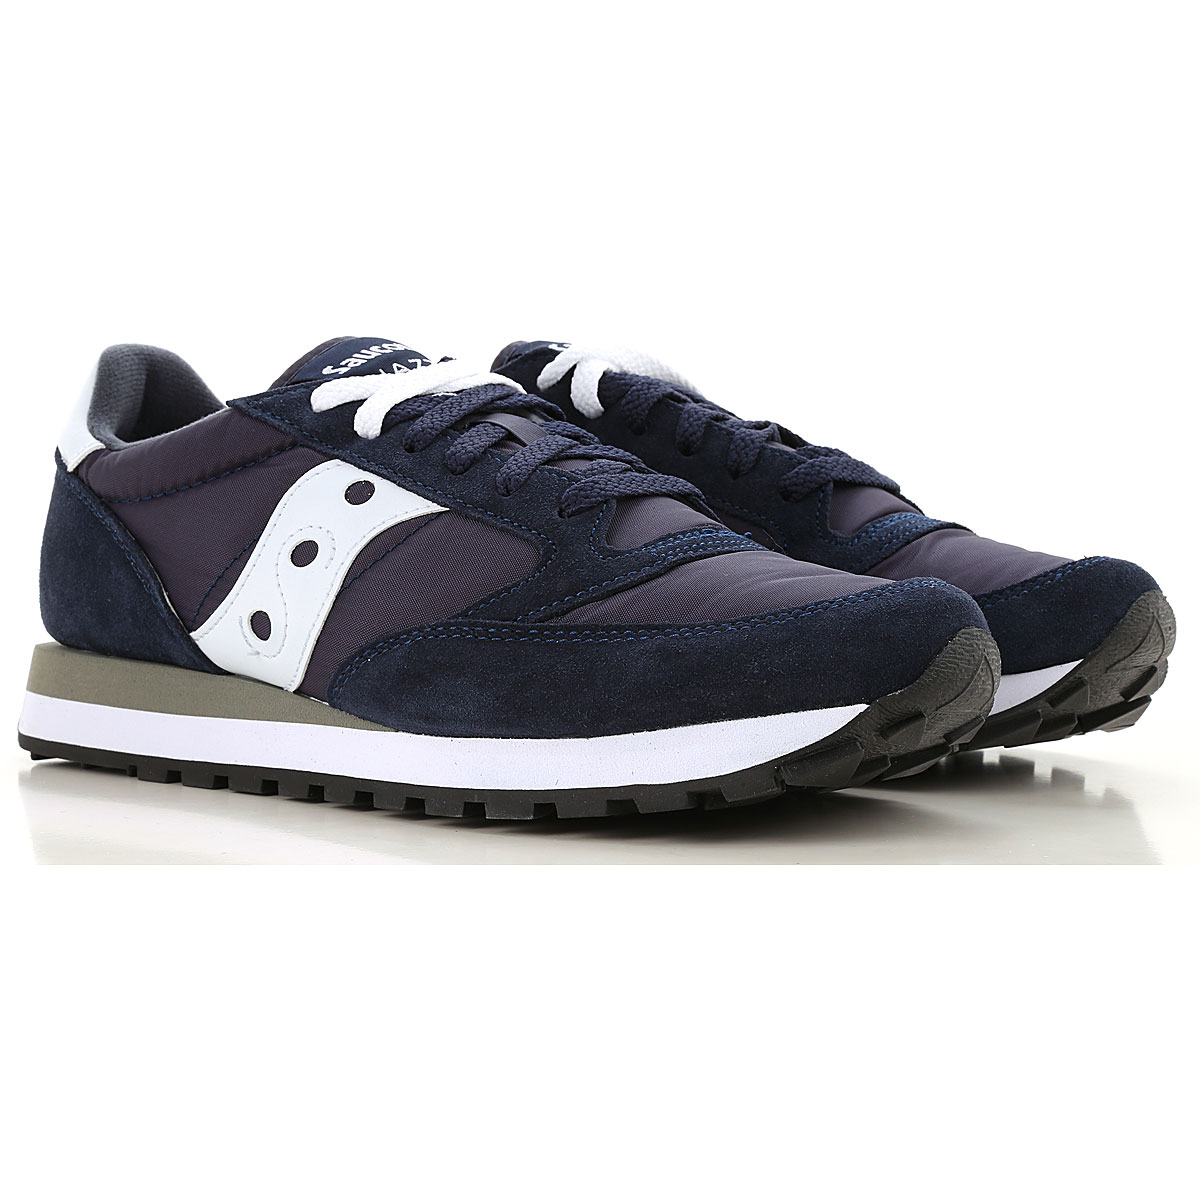 Mens Shoes Saucony, Style code: s2044-316-